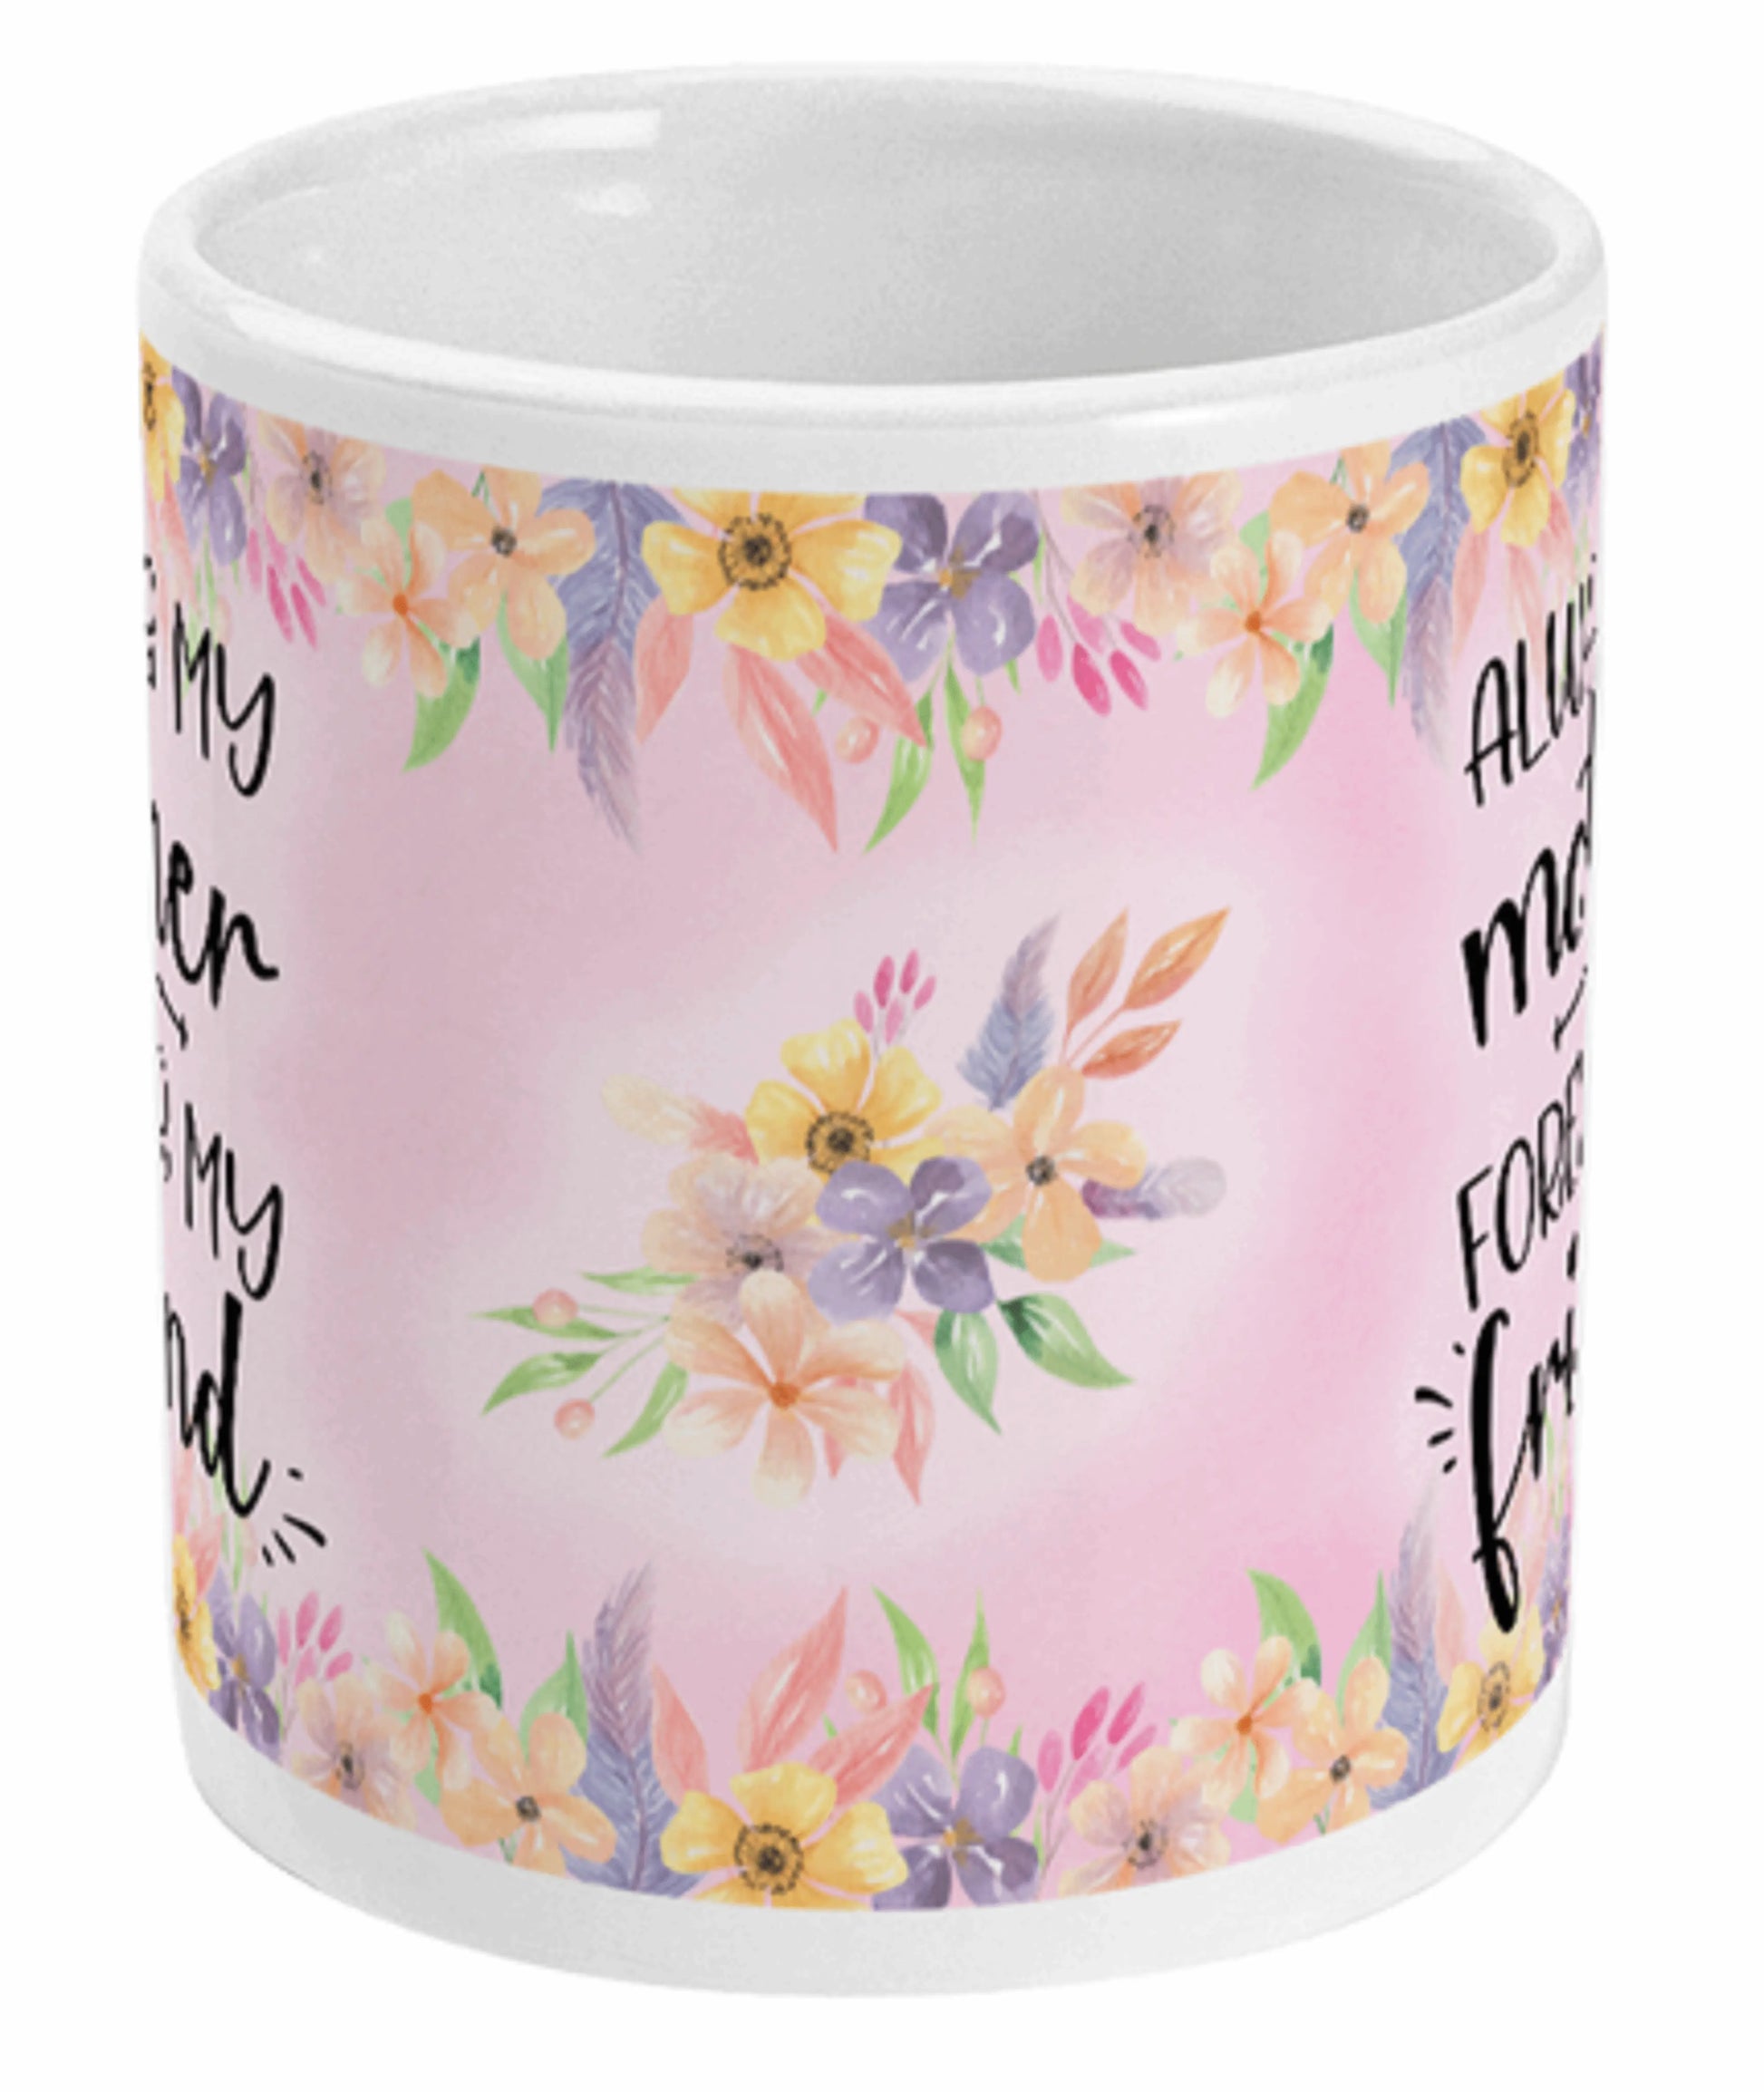  Always My Mother Mothers Day Mug by Free Spirit Accessories sold by Free Spirit Accessories